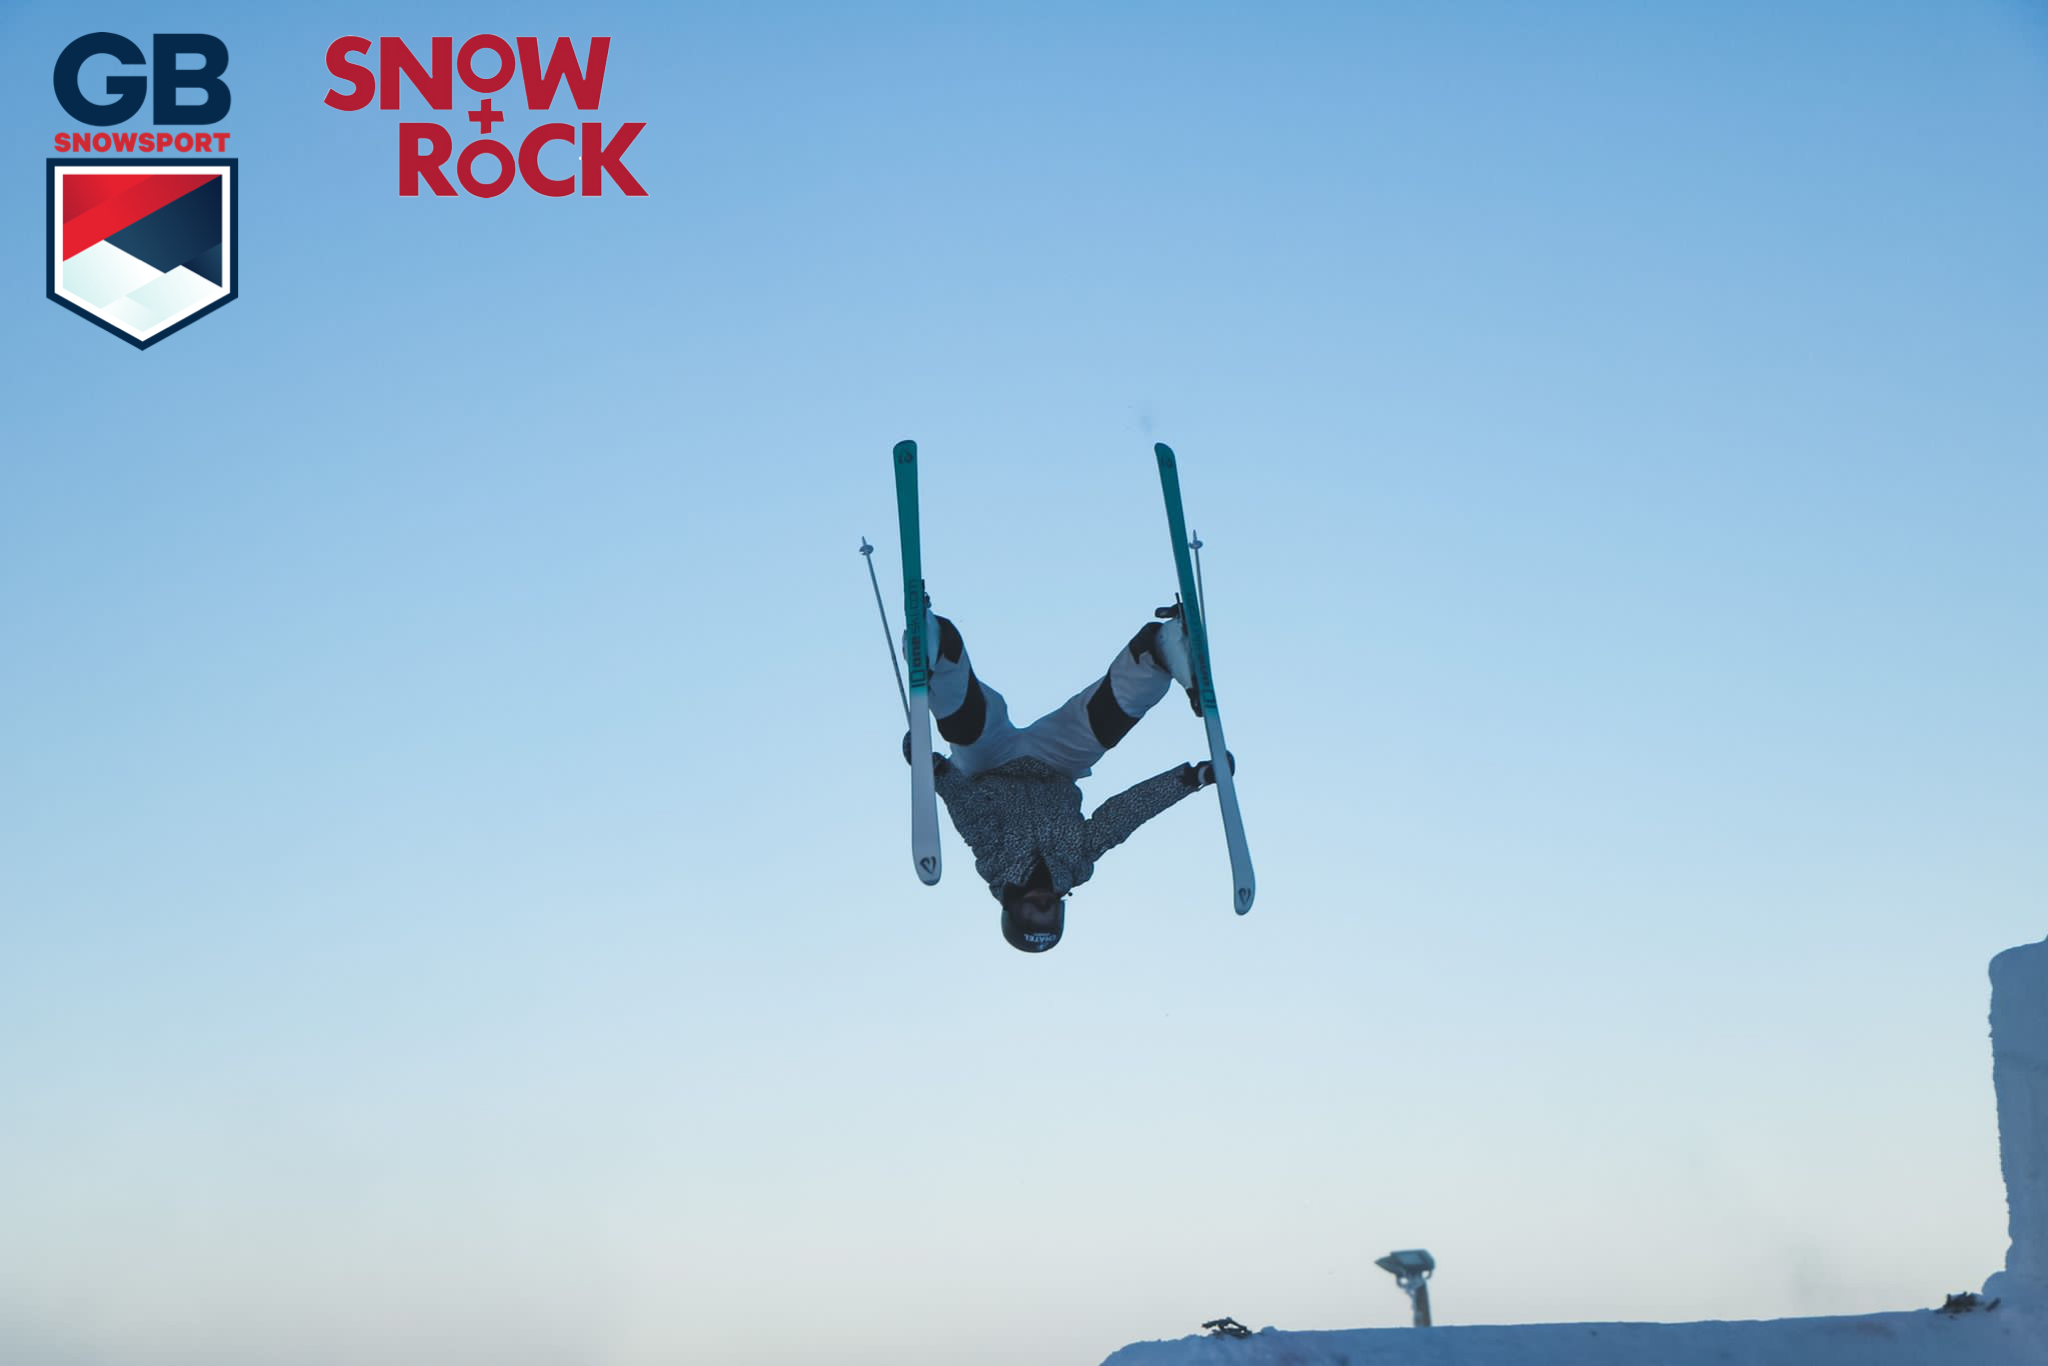 Snow+Rock Results Round-Up: Musgrave and Gerken Schofield light up World Cup stage